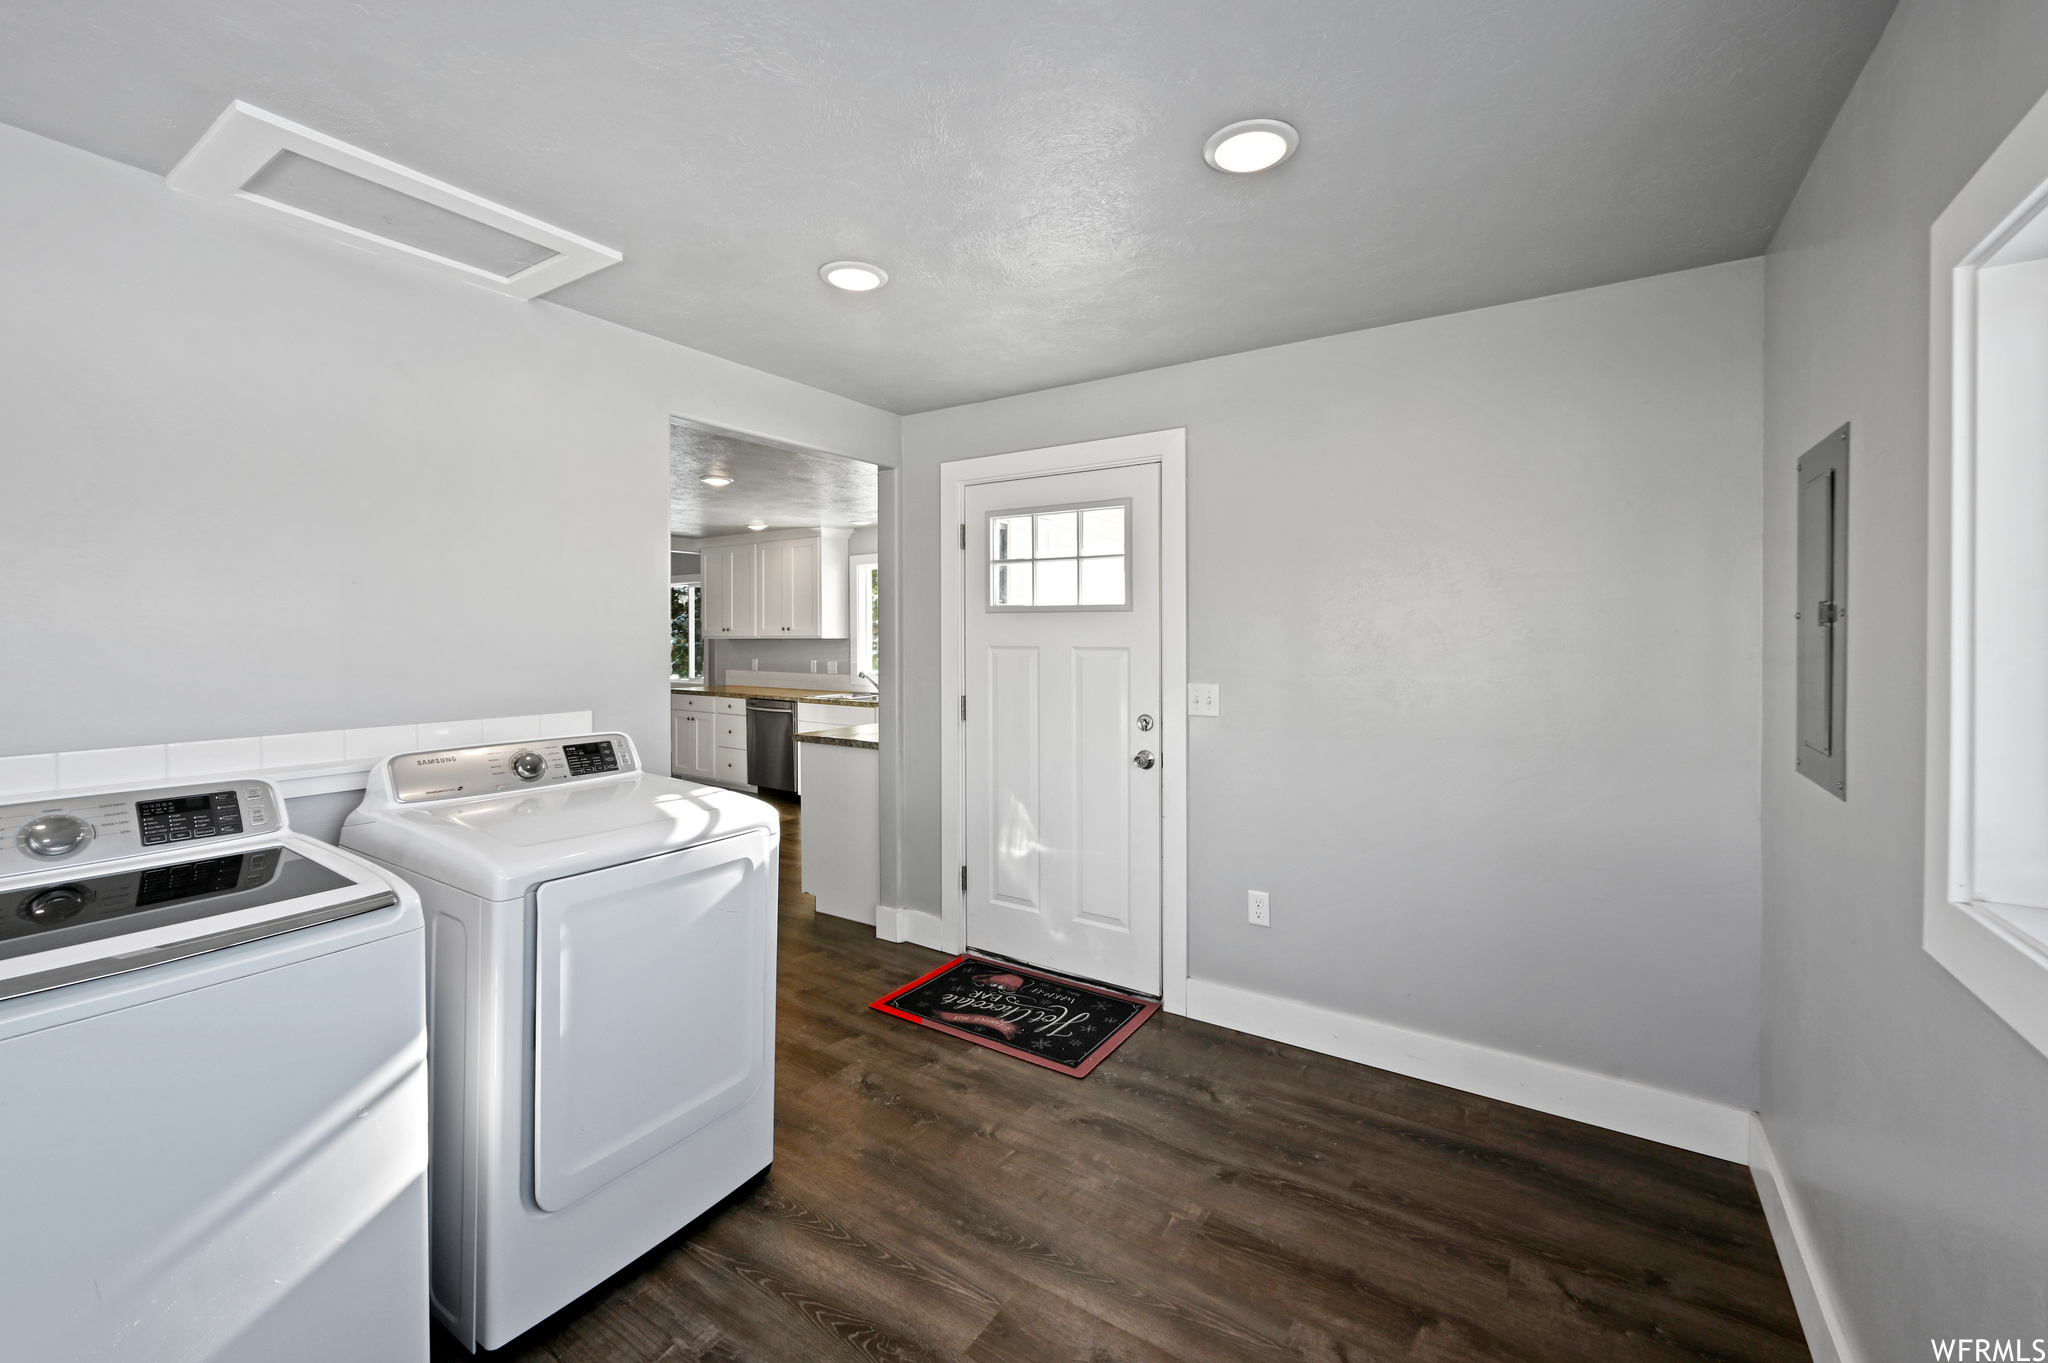 Laundry room featuring dark wood-type flooring and washing machine and clothes dryer